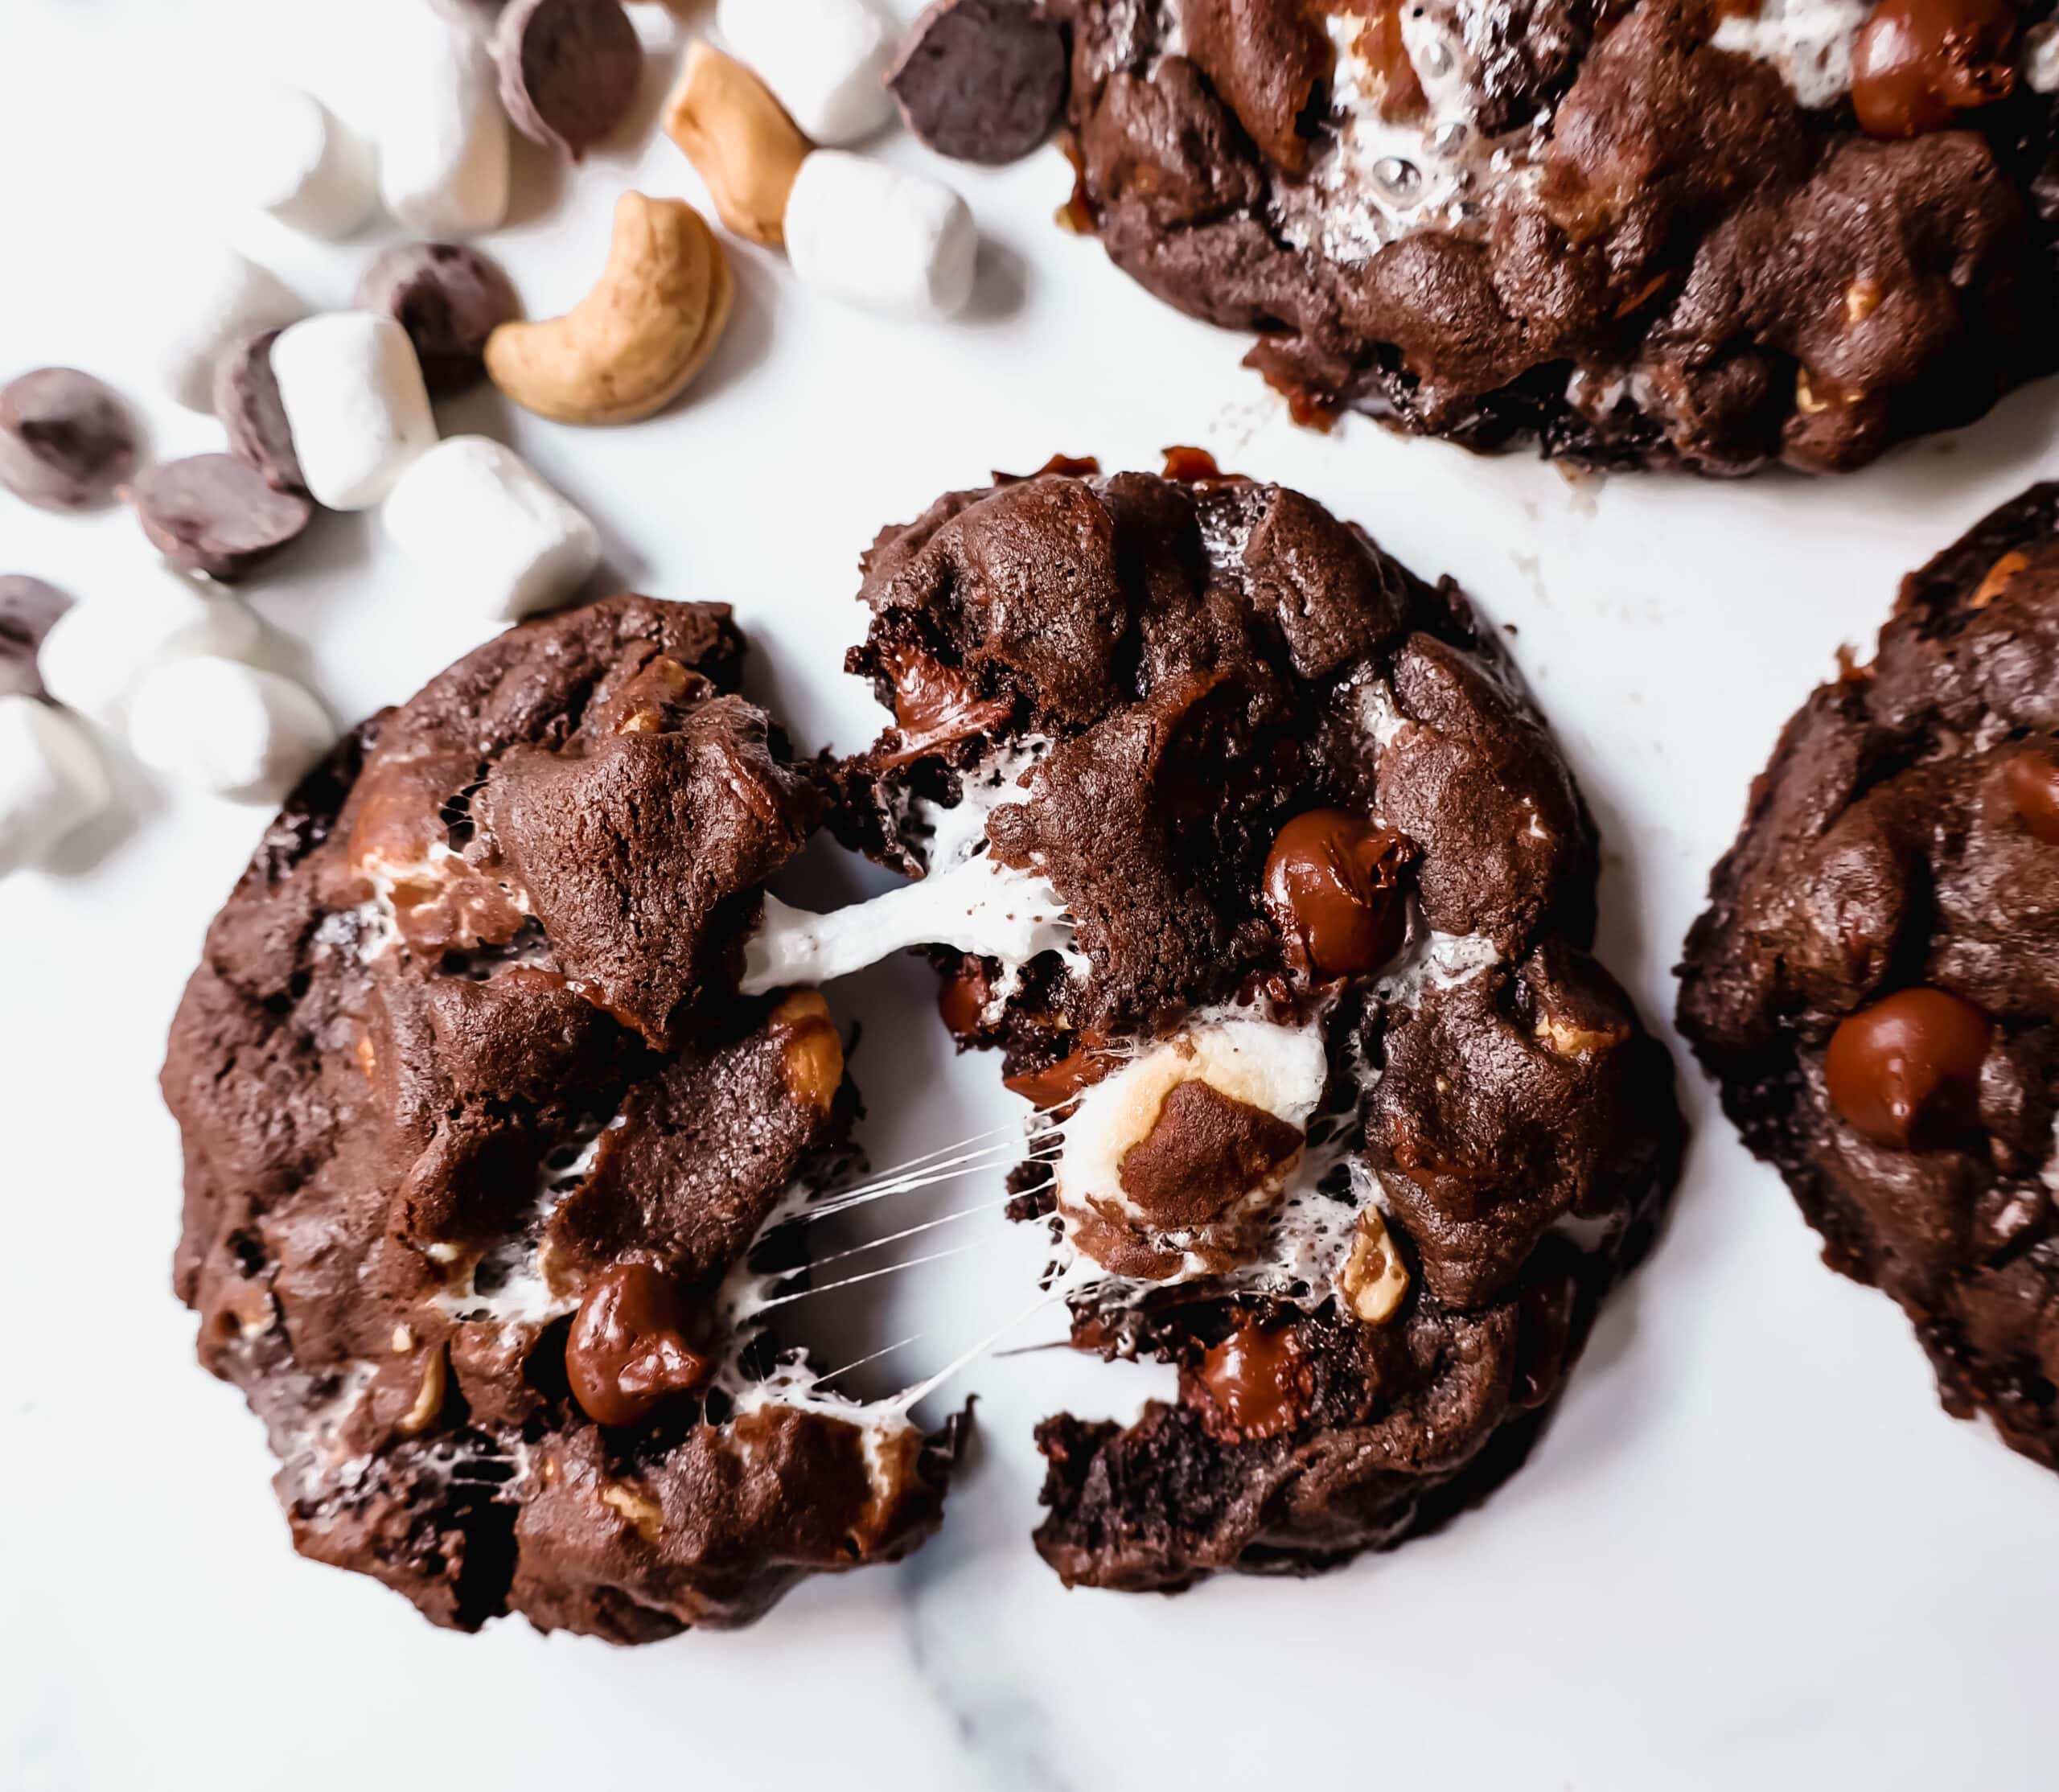 These Levain Bakery Rocky Road Cookies are rich, thick, soft, chewy chocolate cookies with semi-sweet chocolate chips, mini marshmallows, and cashews. The best Levain Bakery Copycat Rocky Road Cookie Recipe!